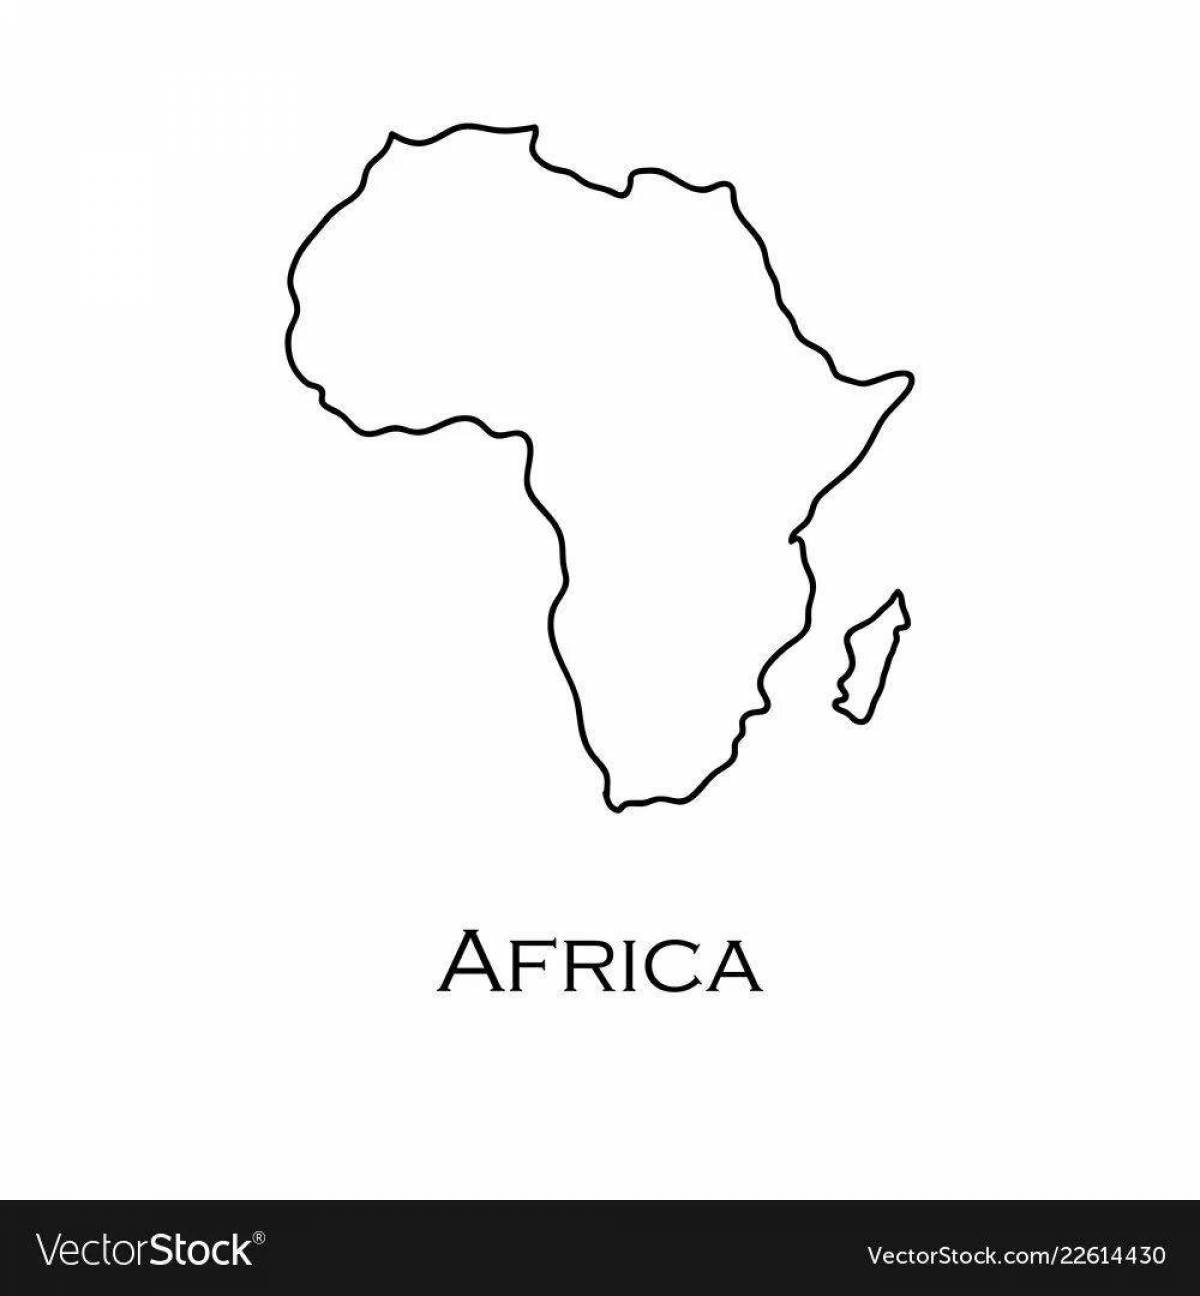 Amazing africa map coloring page